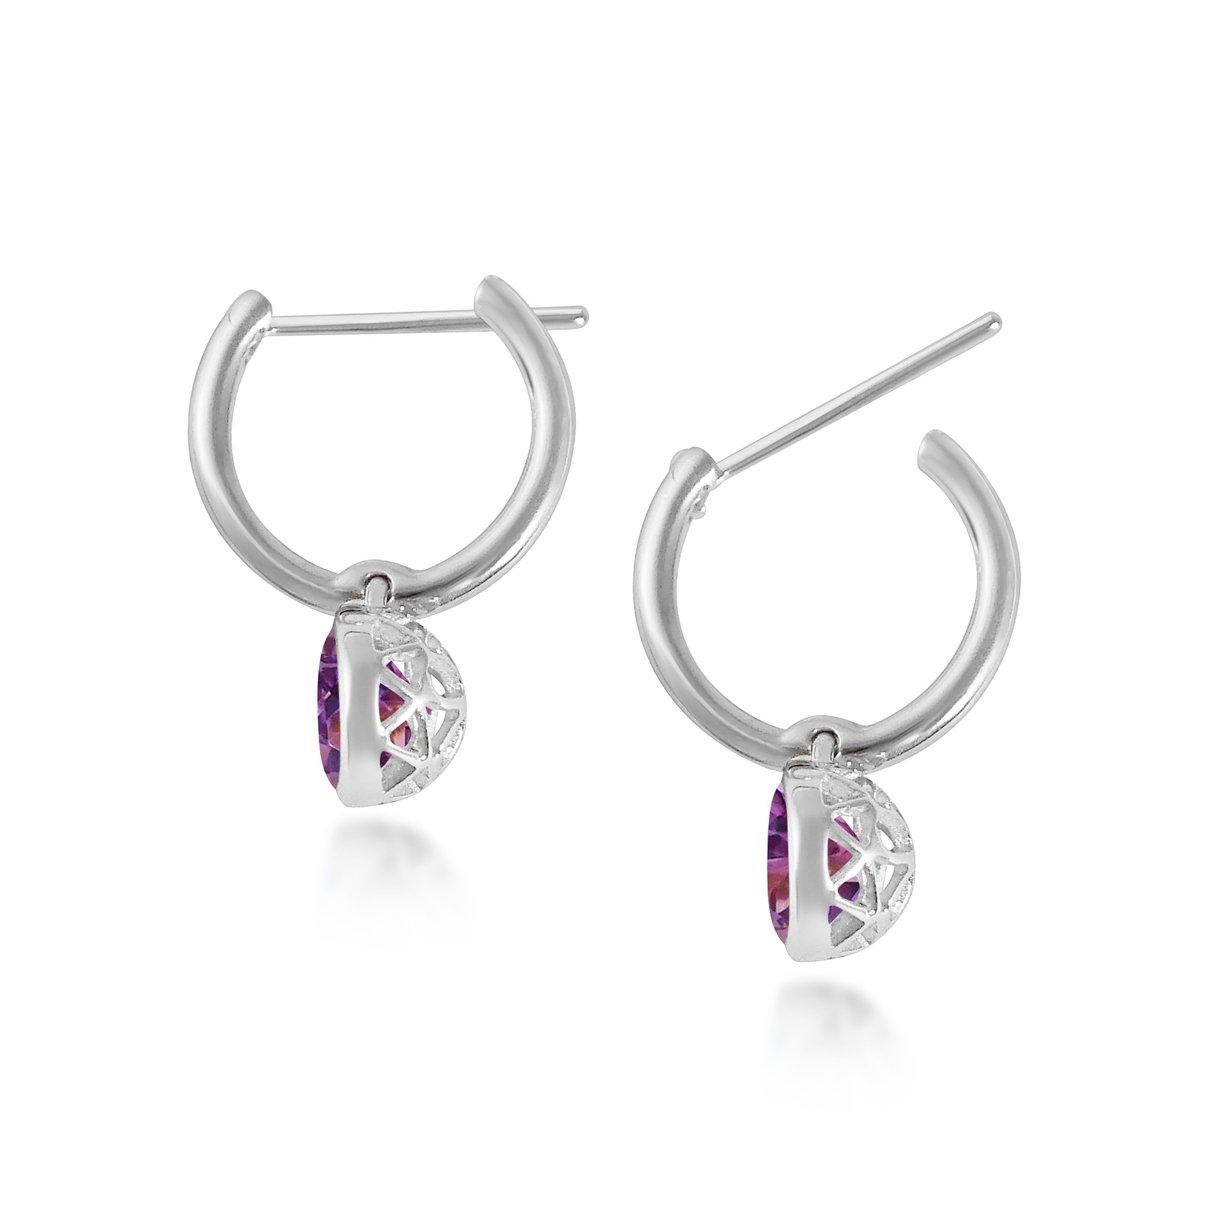 Handcrafted 2.40 Carats Amethyst 18 Karat White Gold Drop Earrings. The 8mm natural stones are set in our iconic hand pierced gold lace to let the light through. Our precious and fine stones on our dangling earrings are highlighted by a diamond on